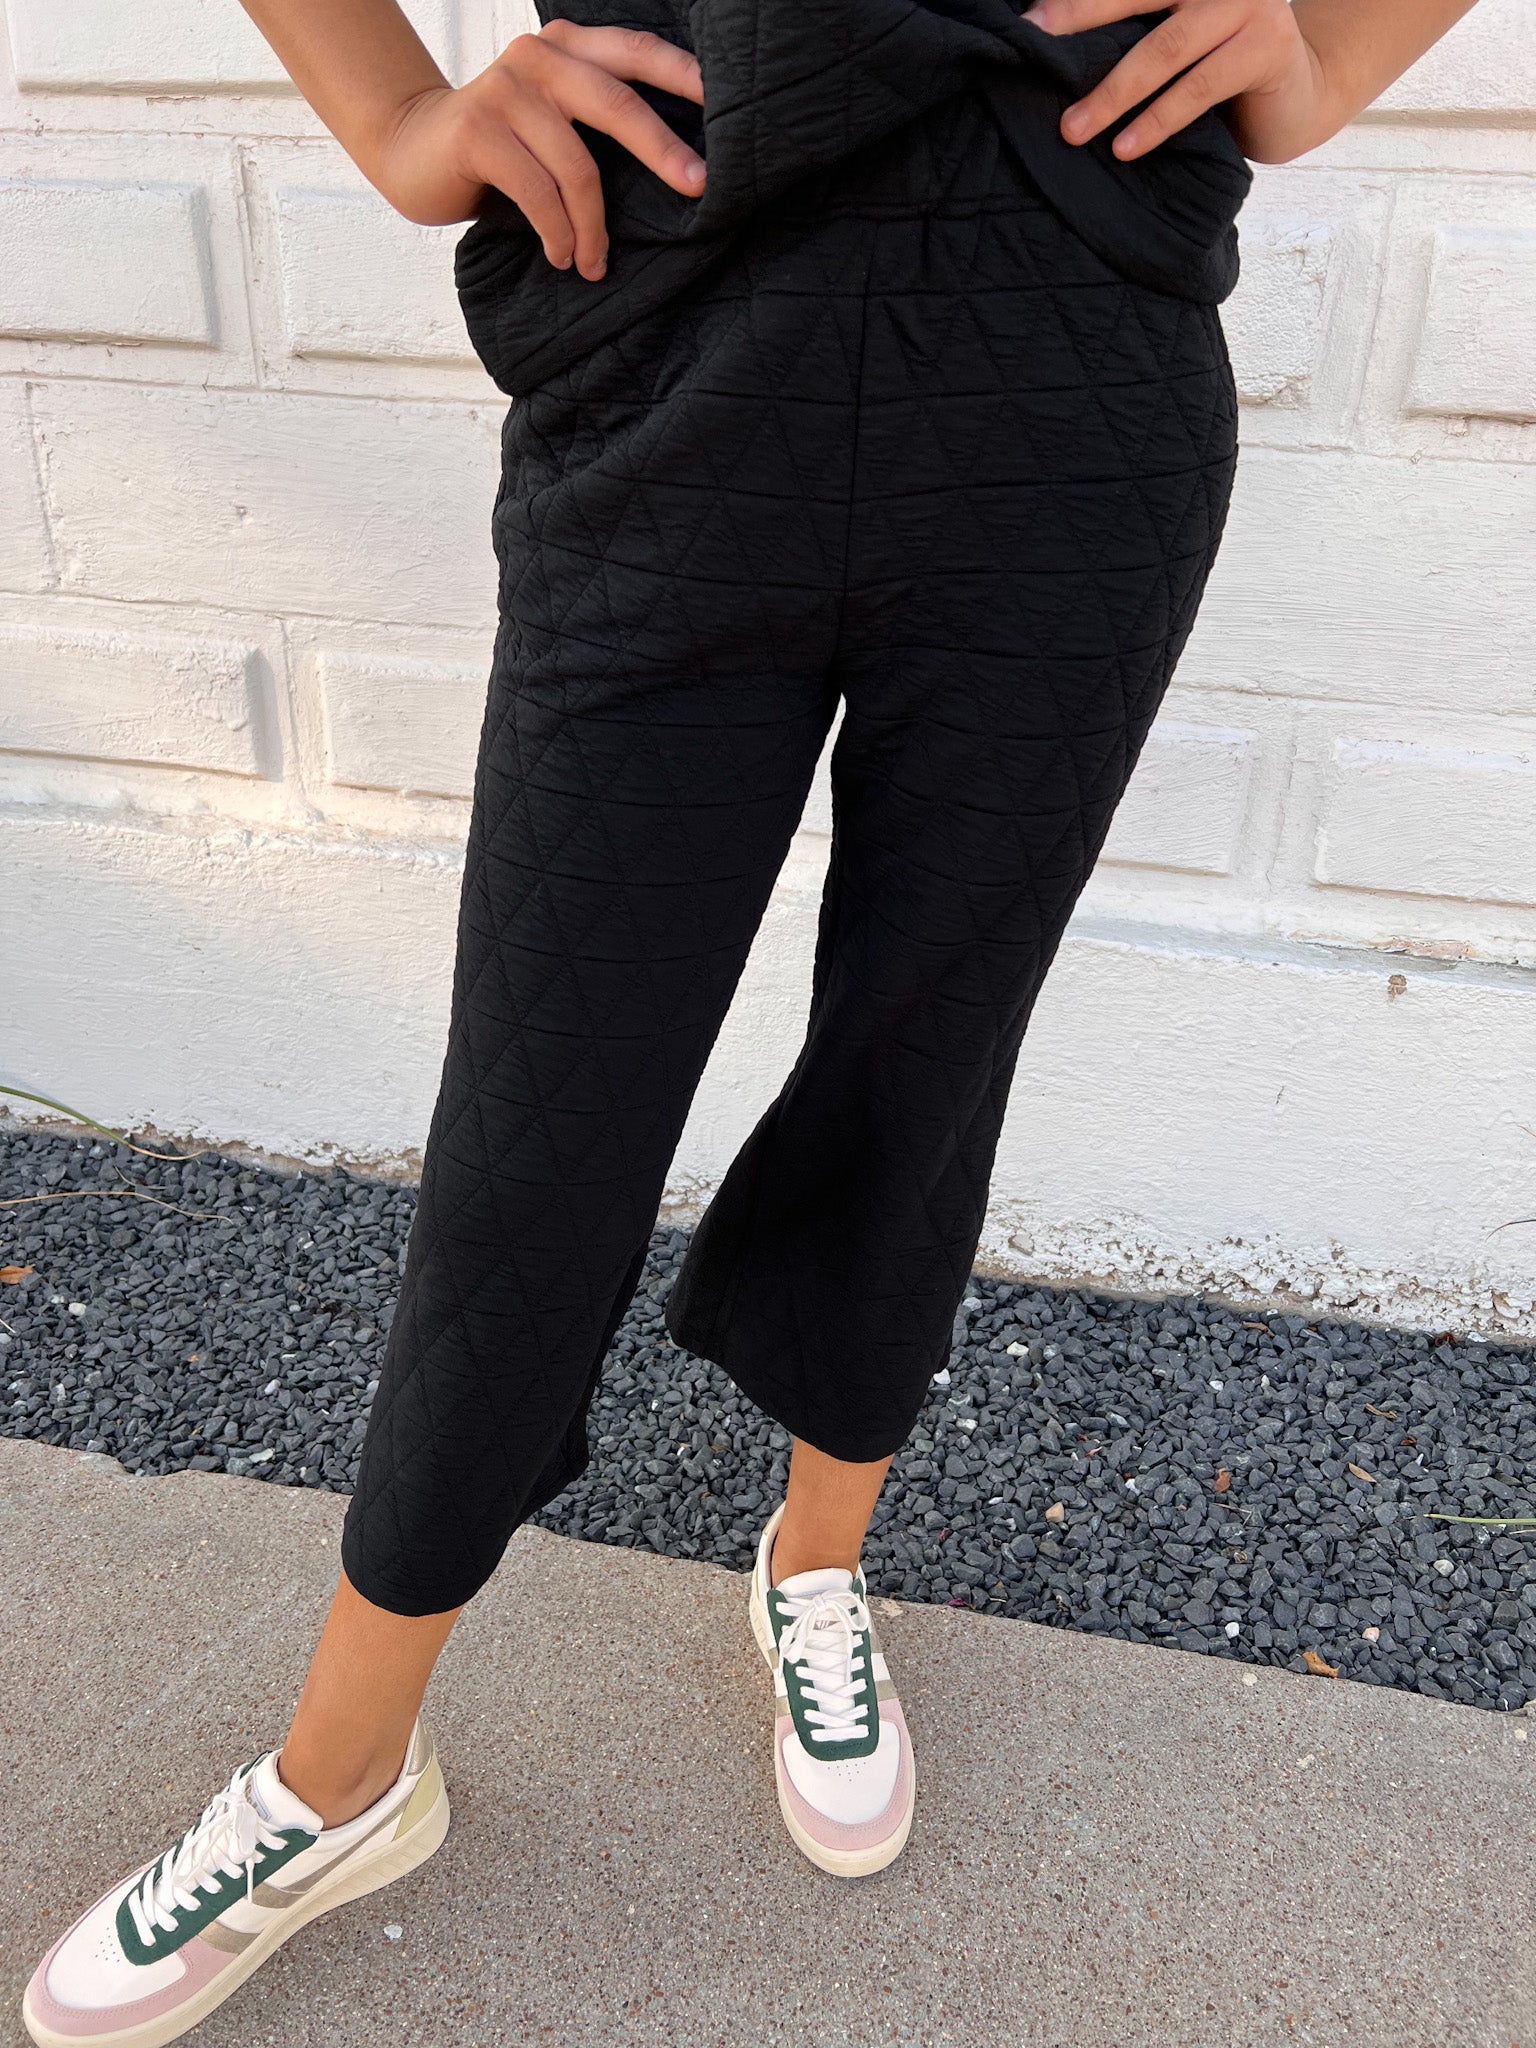 Quilted Pants, Black (Top Sold Separately)